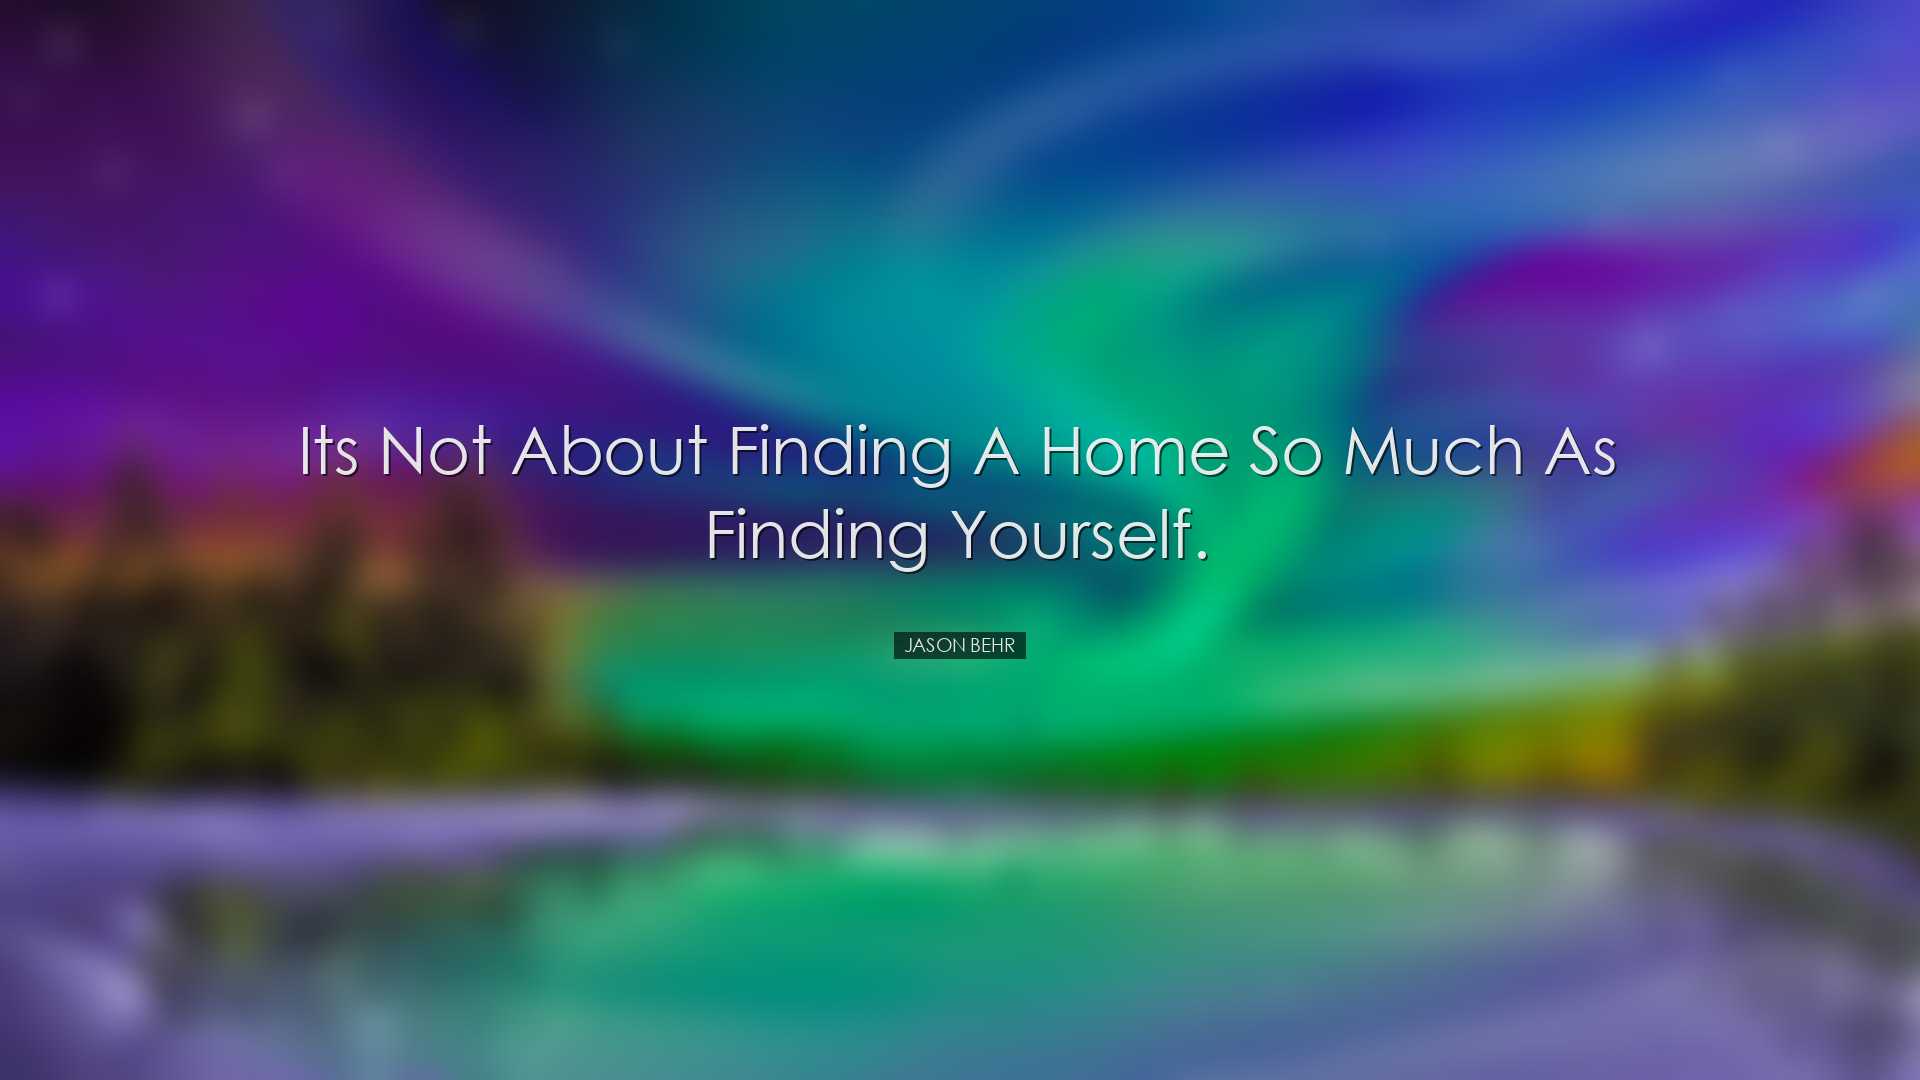 Its not about finding a home so much as finding yourself. - Jason